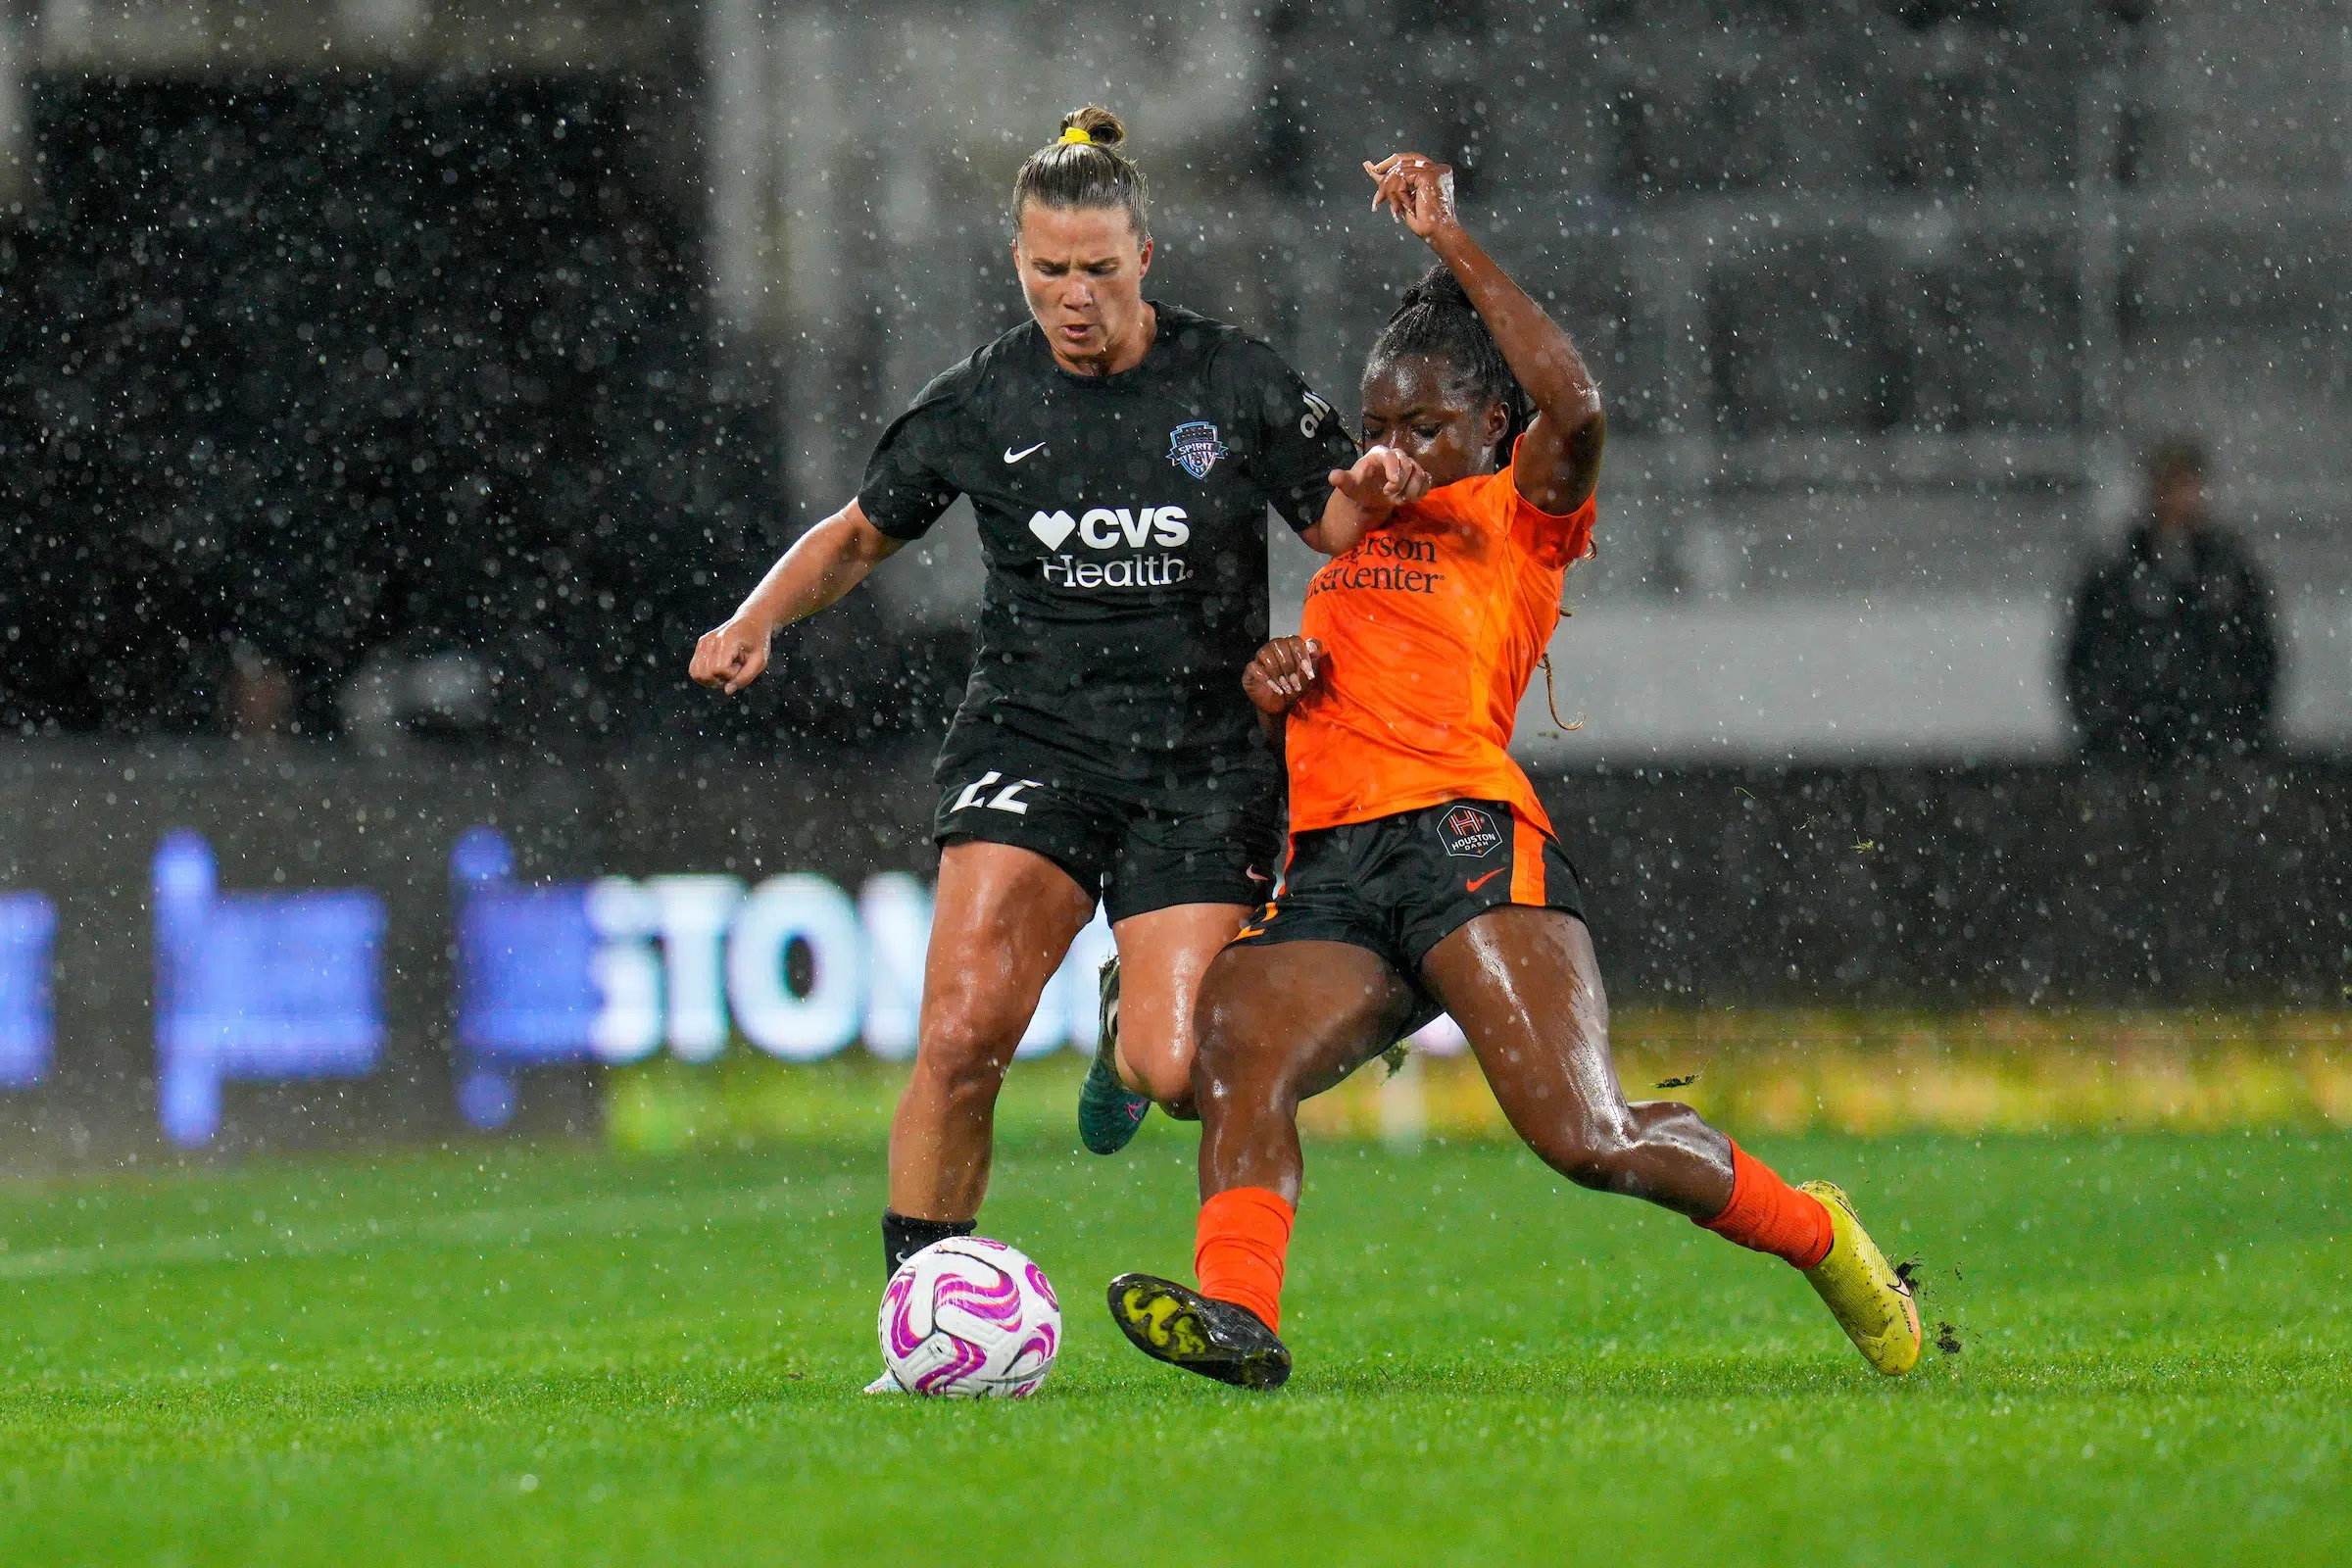 Amber Books in a black uniform dribbles a ball as a defender in an orange uniform attempts to tackle the ball away from her. It's raining.